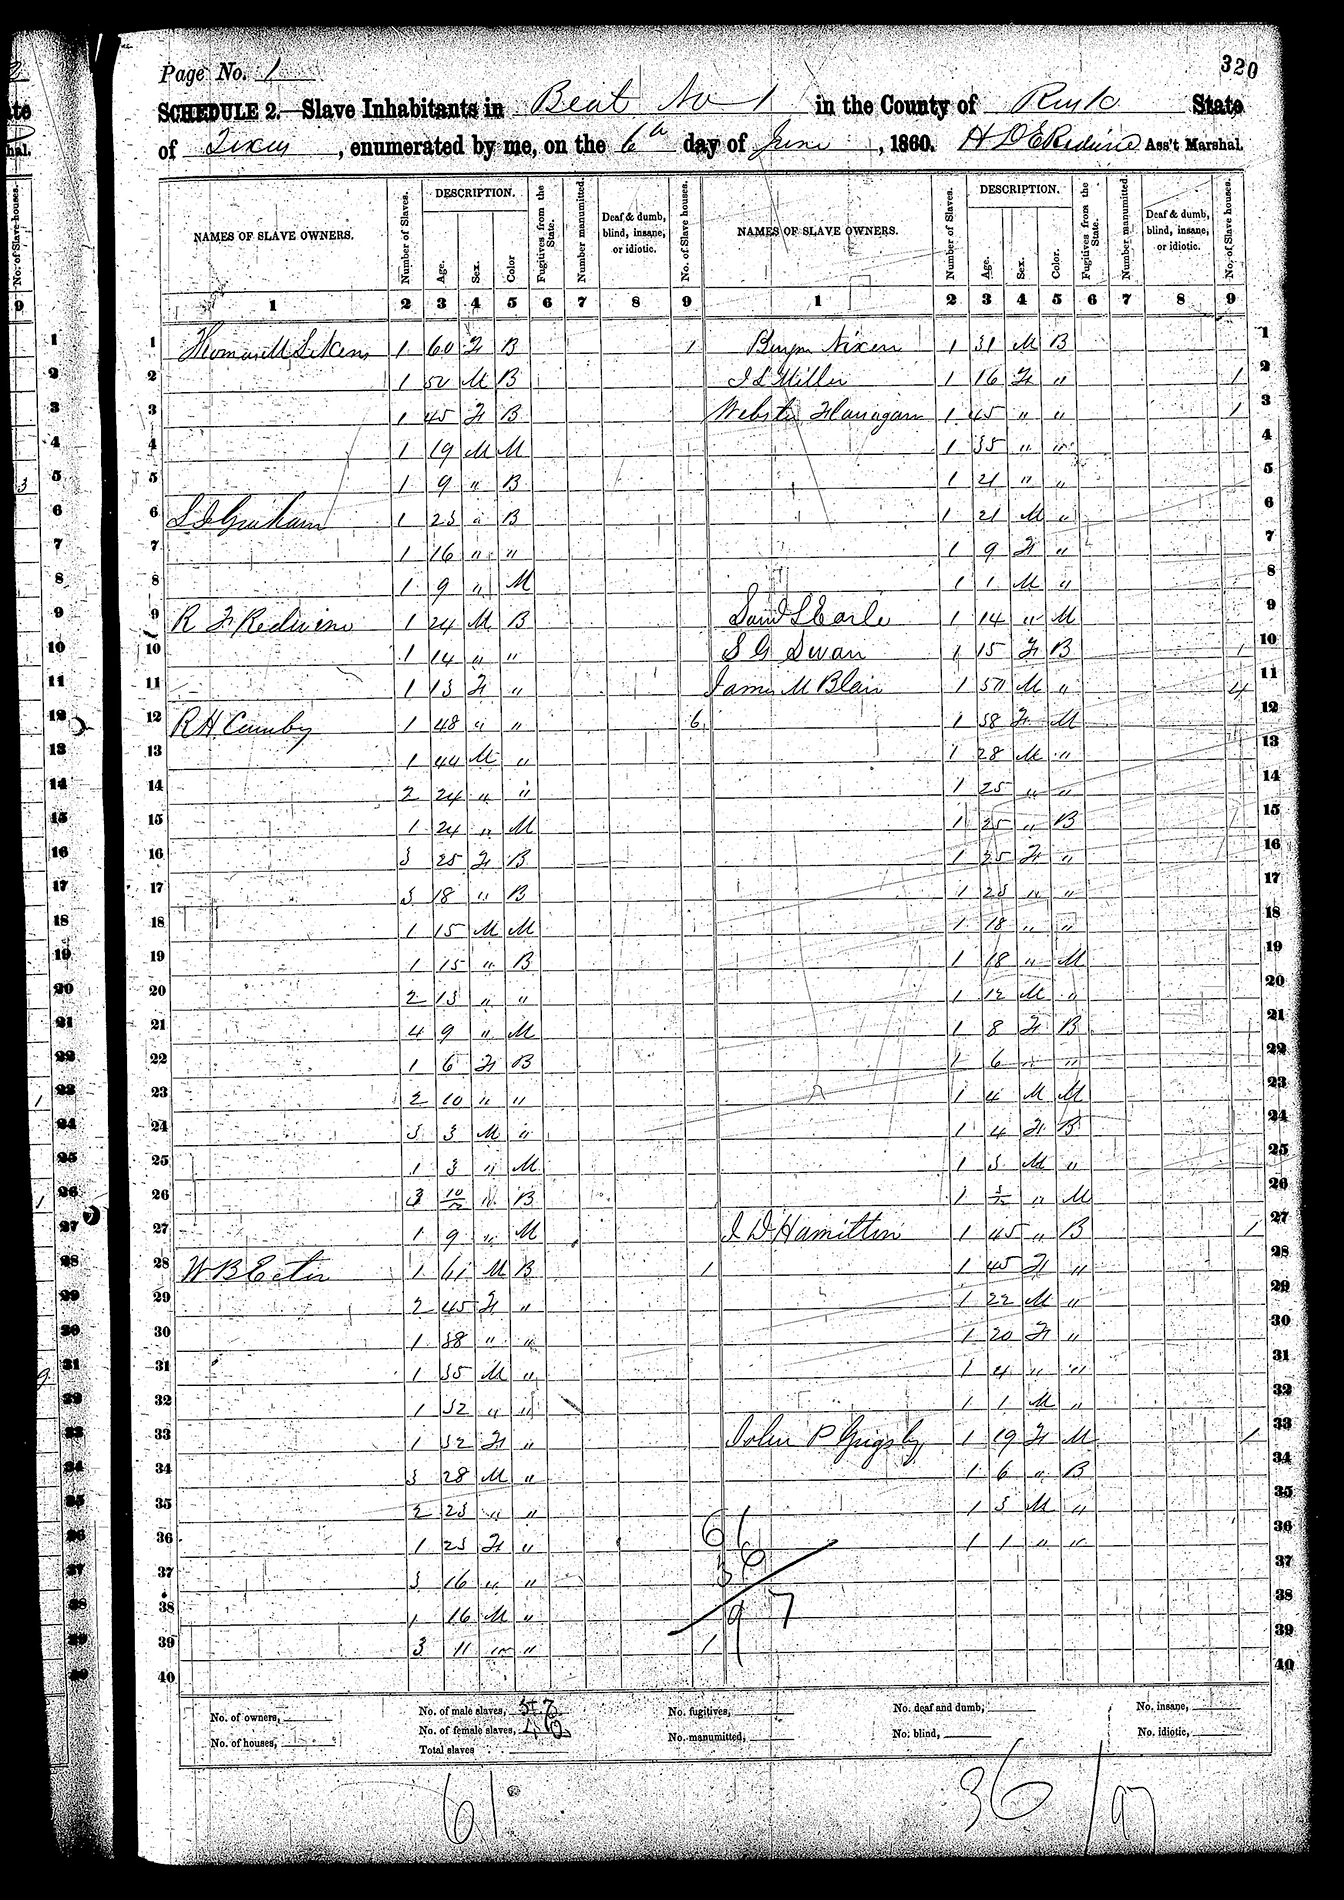 A black and white photocopy of a slave census form, filled by hand.